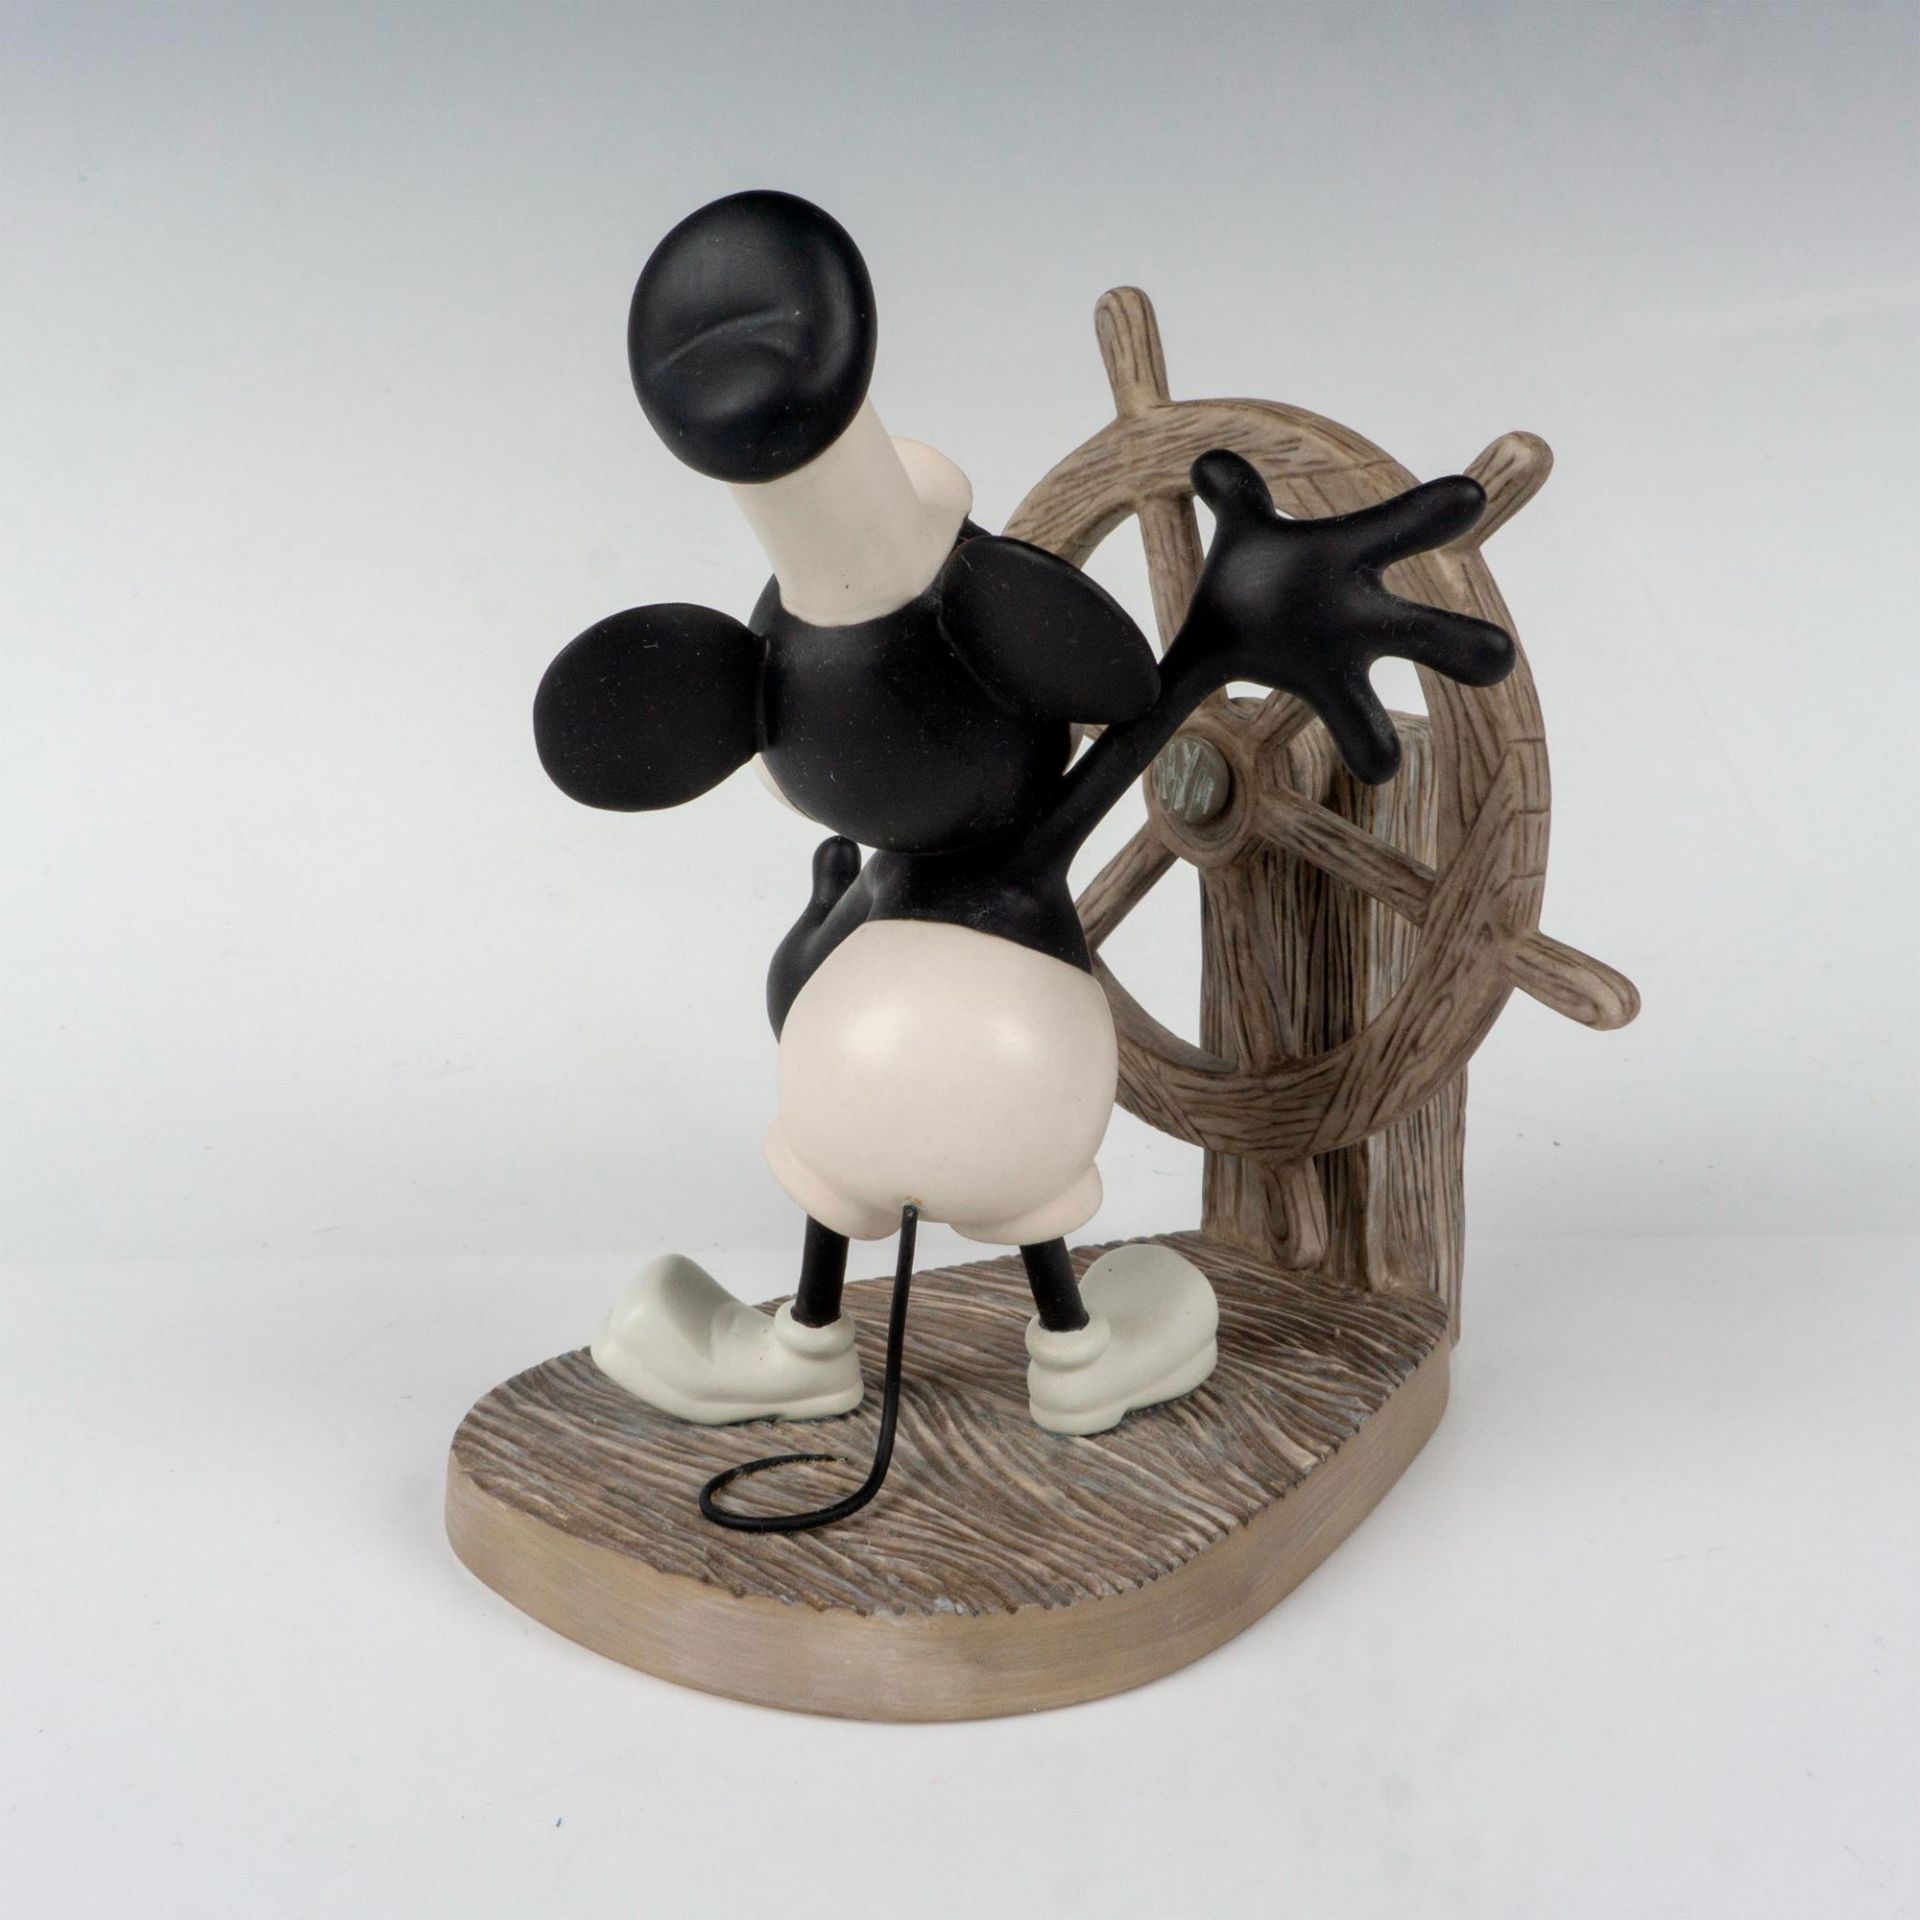 Walt Disney Classics Collection Figurine, Steamboat Willie - Image 2 of 4